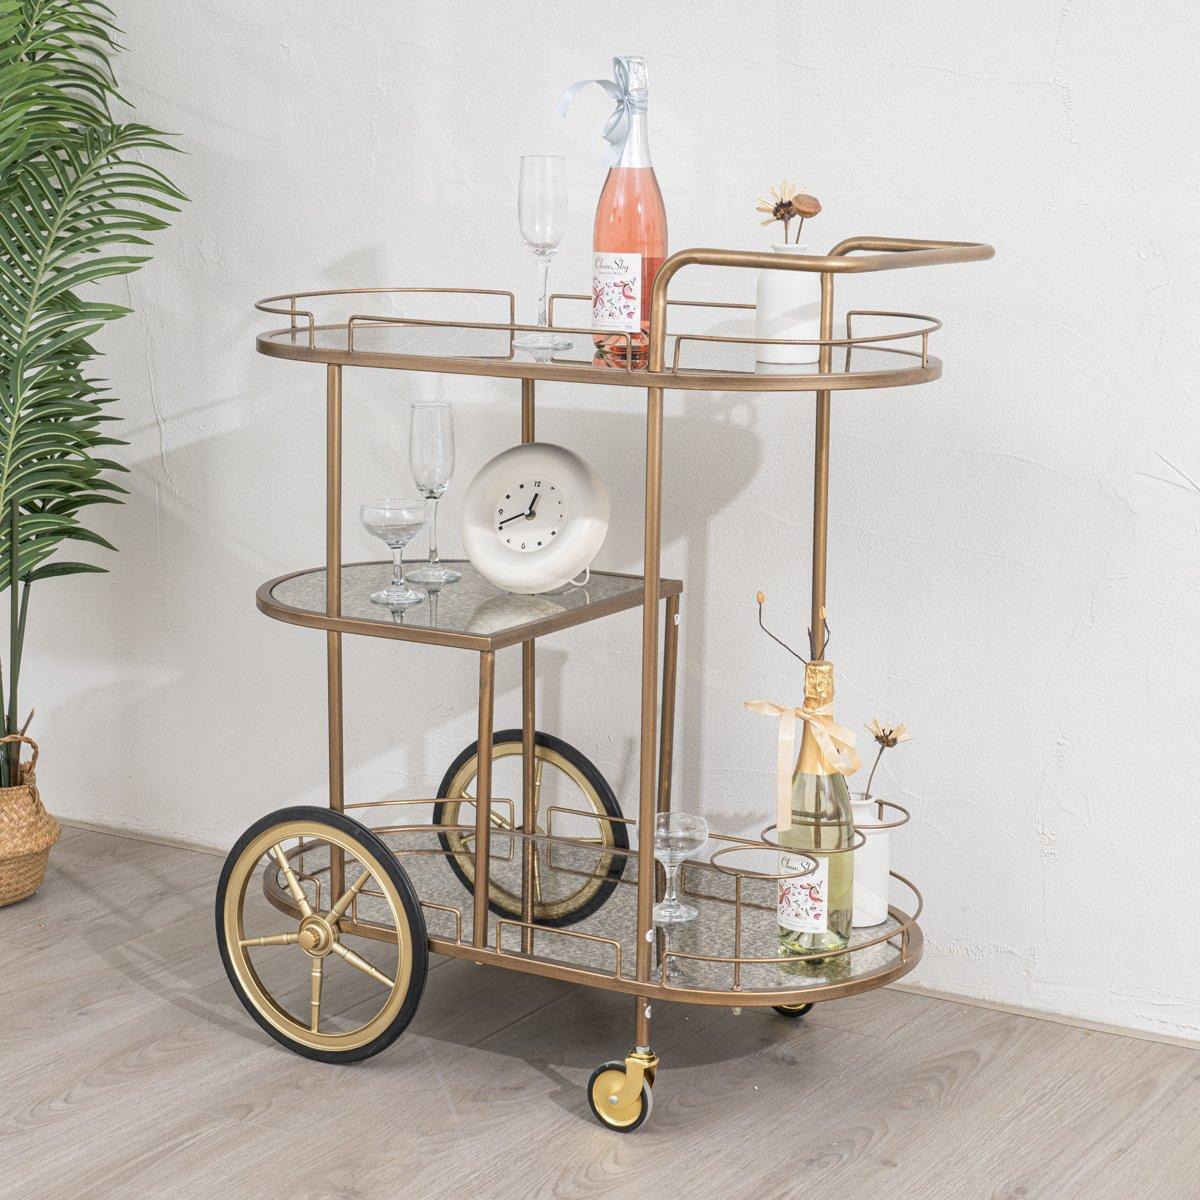 Large Gold Antique Glass Oval Drinks Trolley With Wheels - image 1